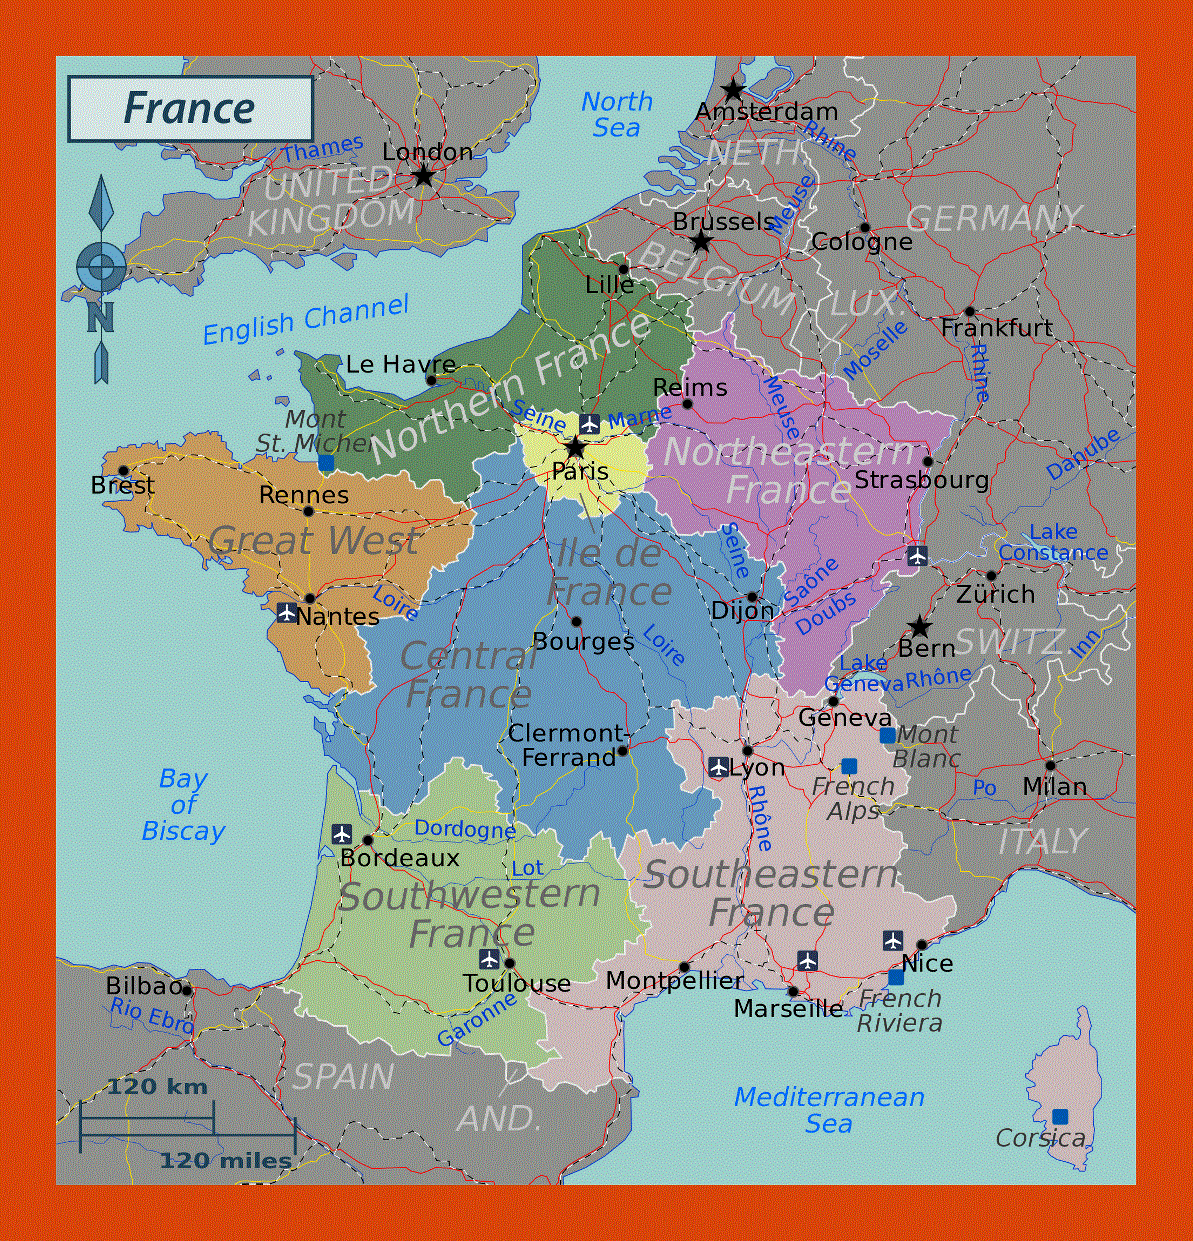 Regions map of France